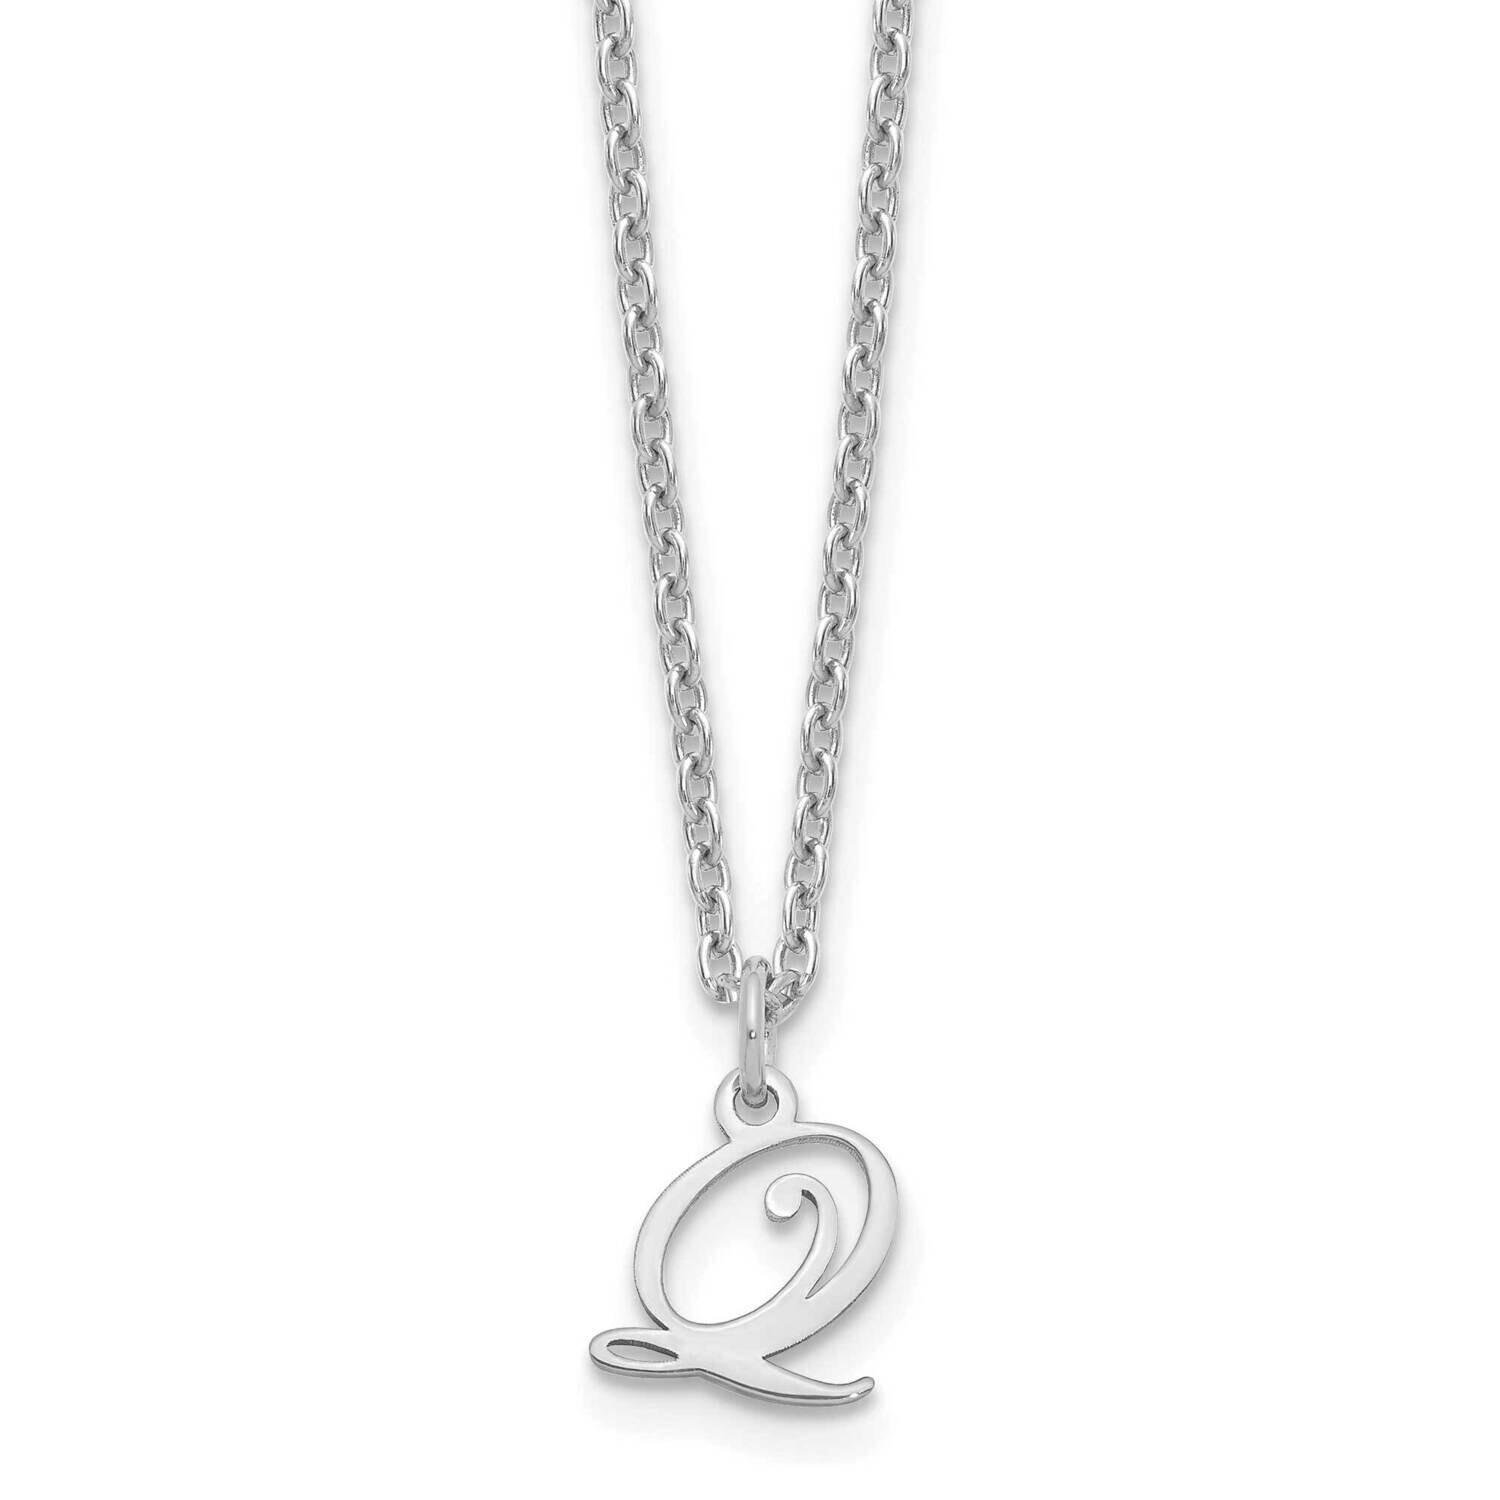 Letter Q Initial Necklace Sterling Silver Rhodium-Plated XNA756SS/Q